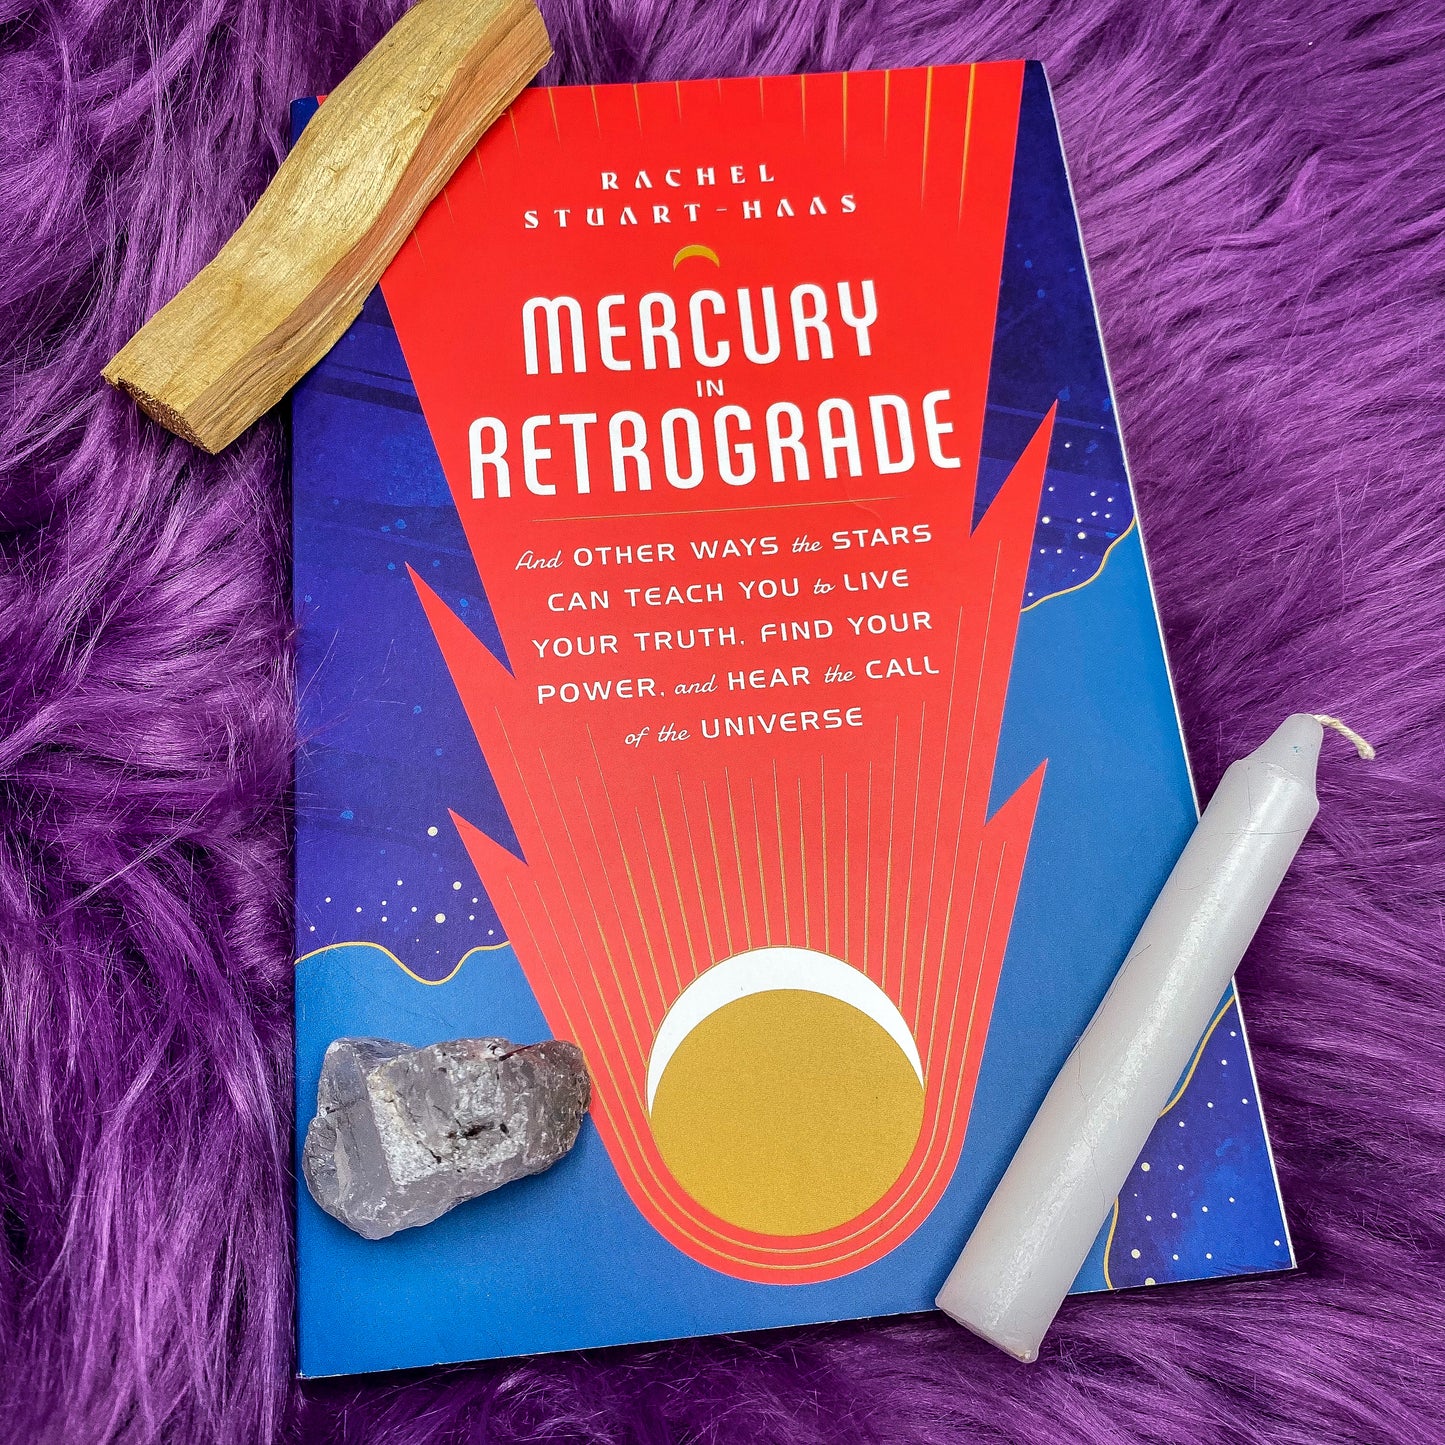 Mercury in Retrograde: And Other Ways the Stars Can Teach You to Live Your Truth, Find Your Power, and Hear the Call of the Universe by Rachel Stuart-Haas